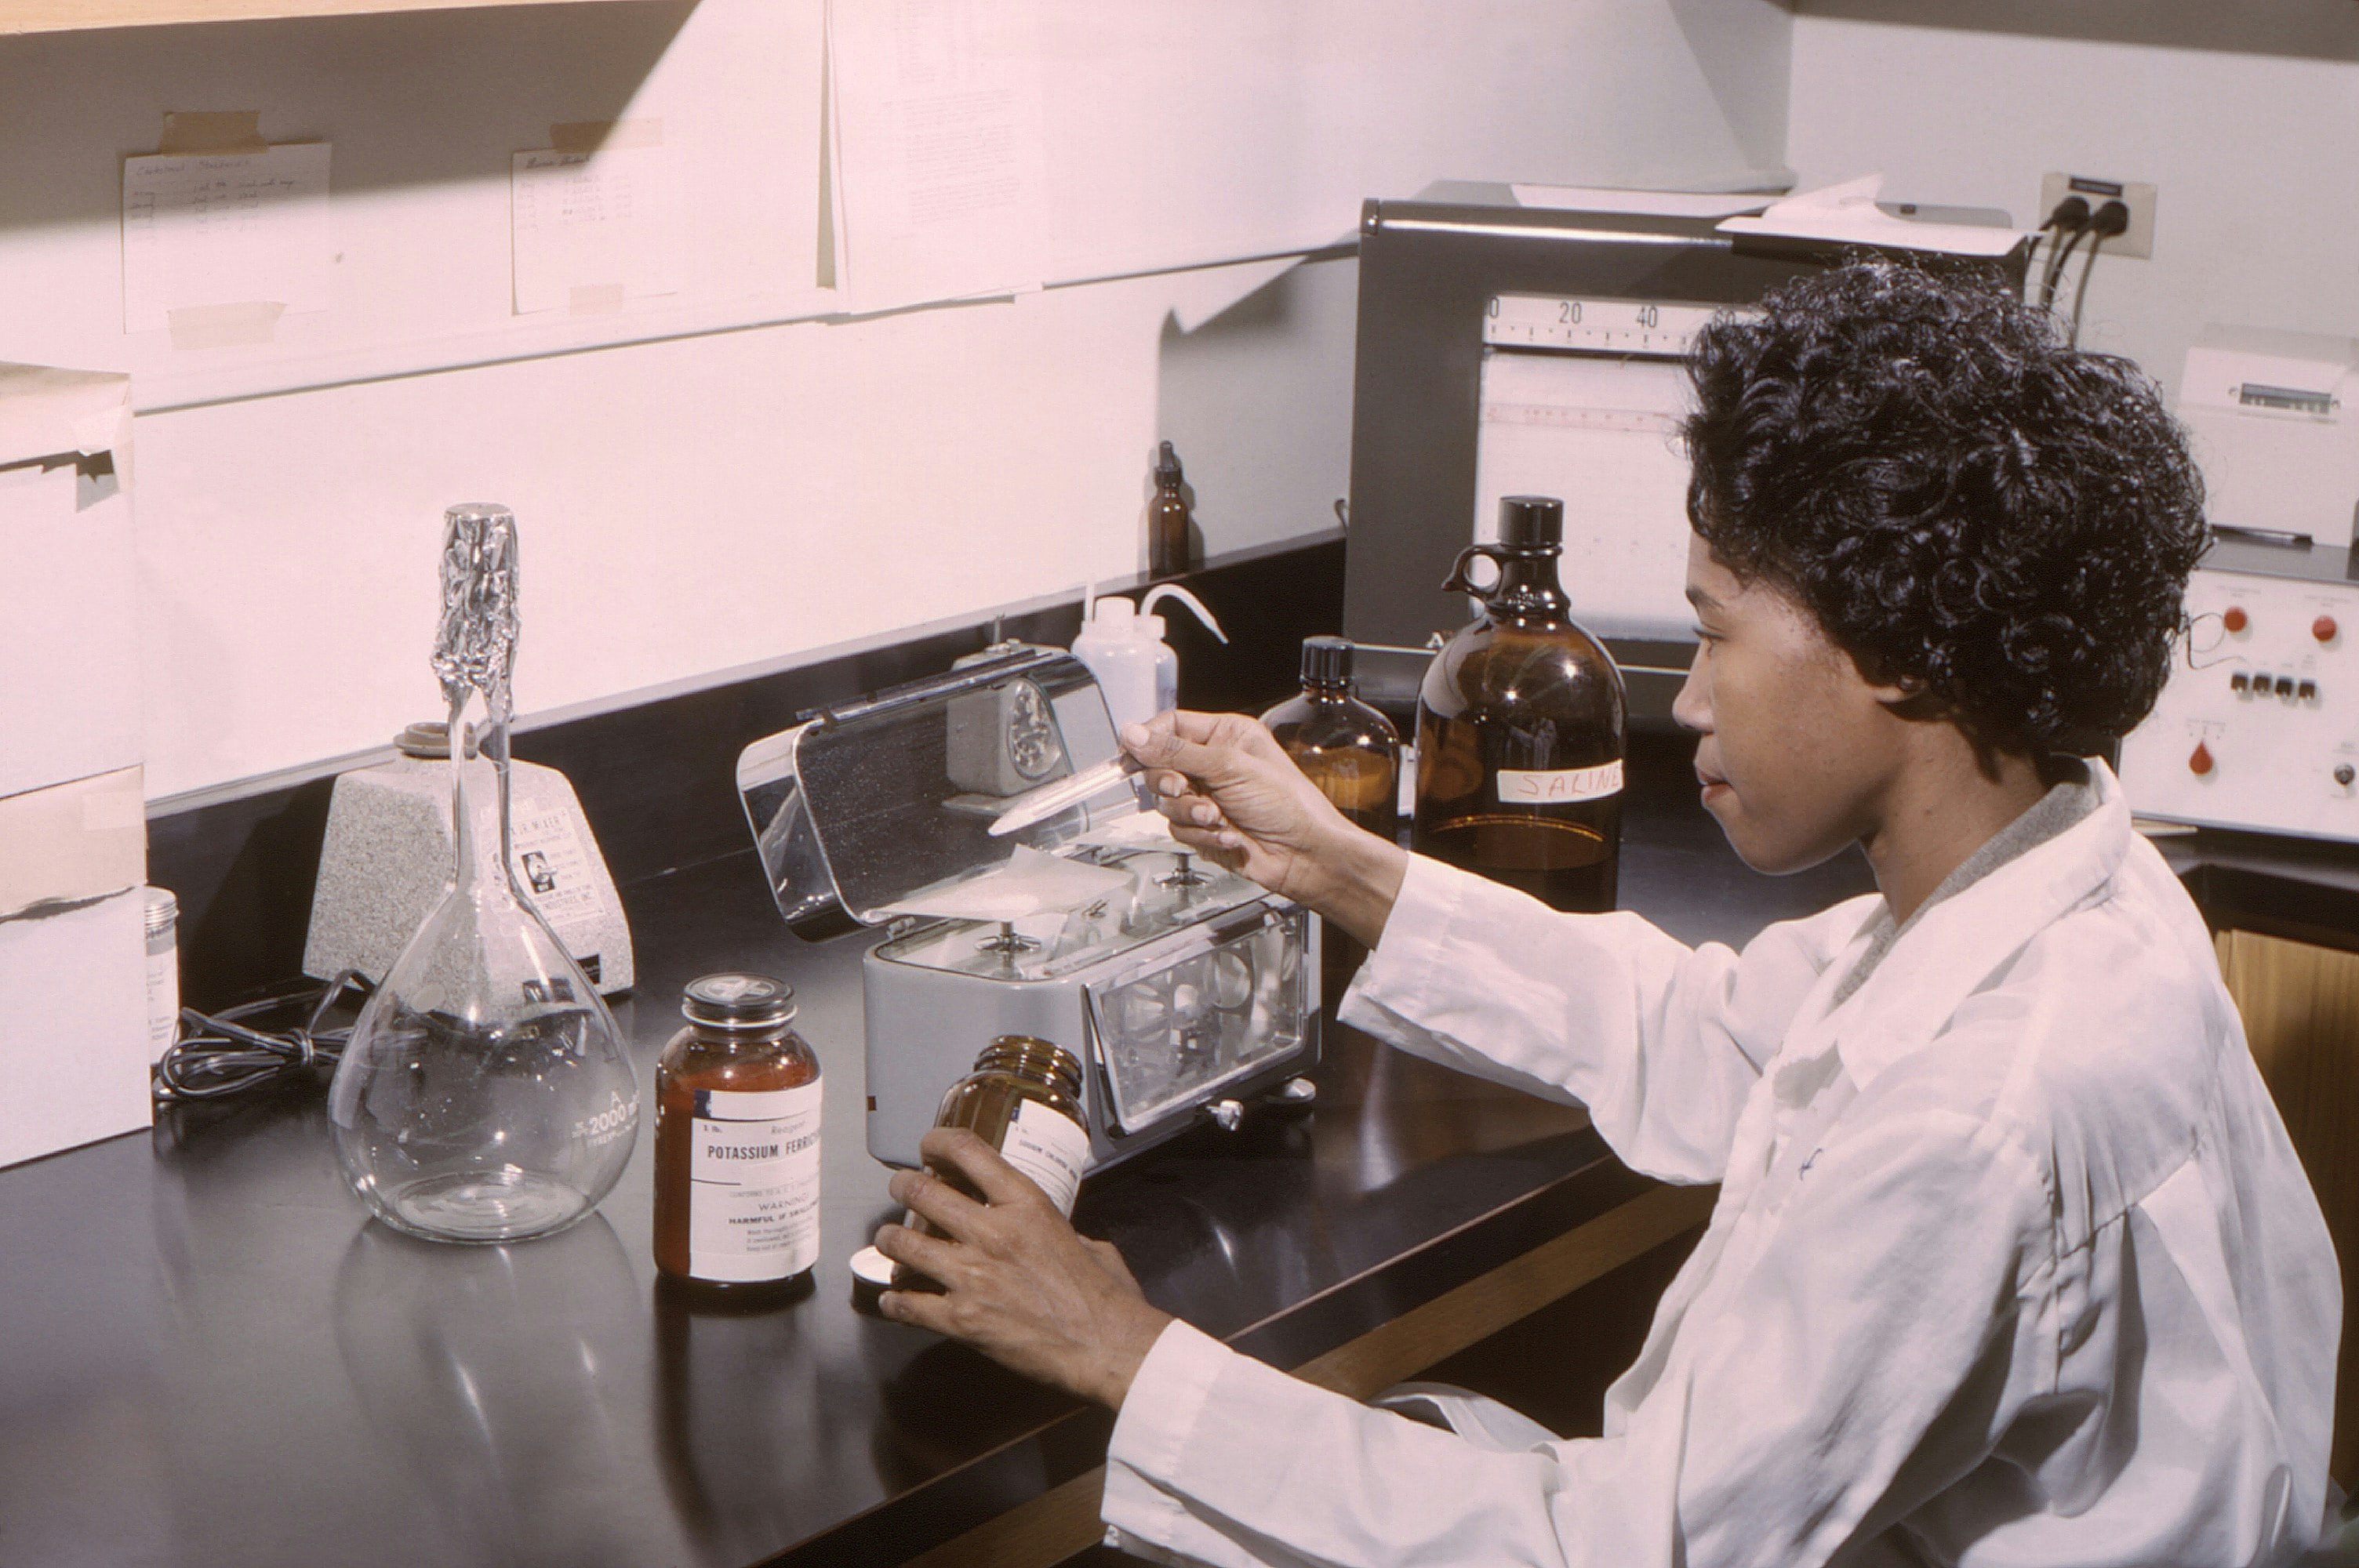 A scientist using a scale to weigh out reagents for sample analysis.